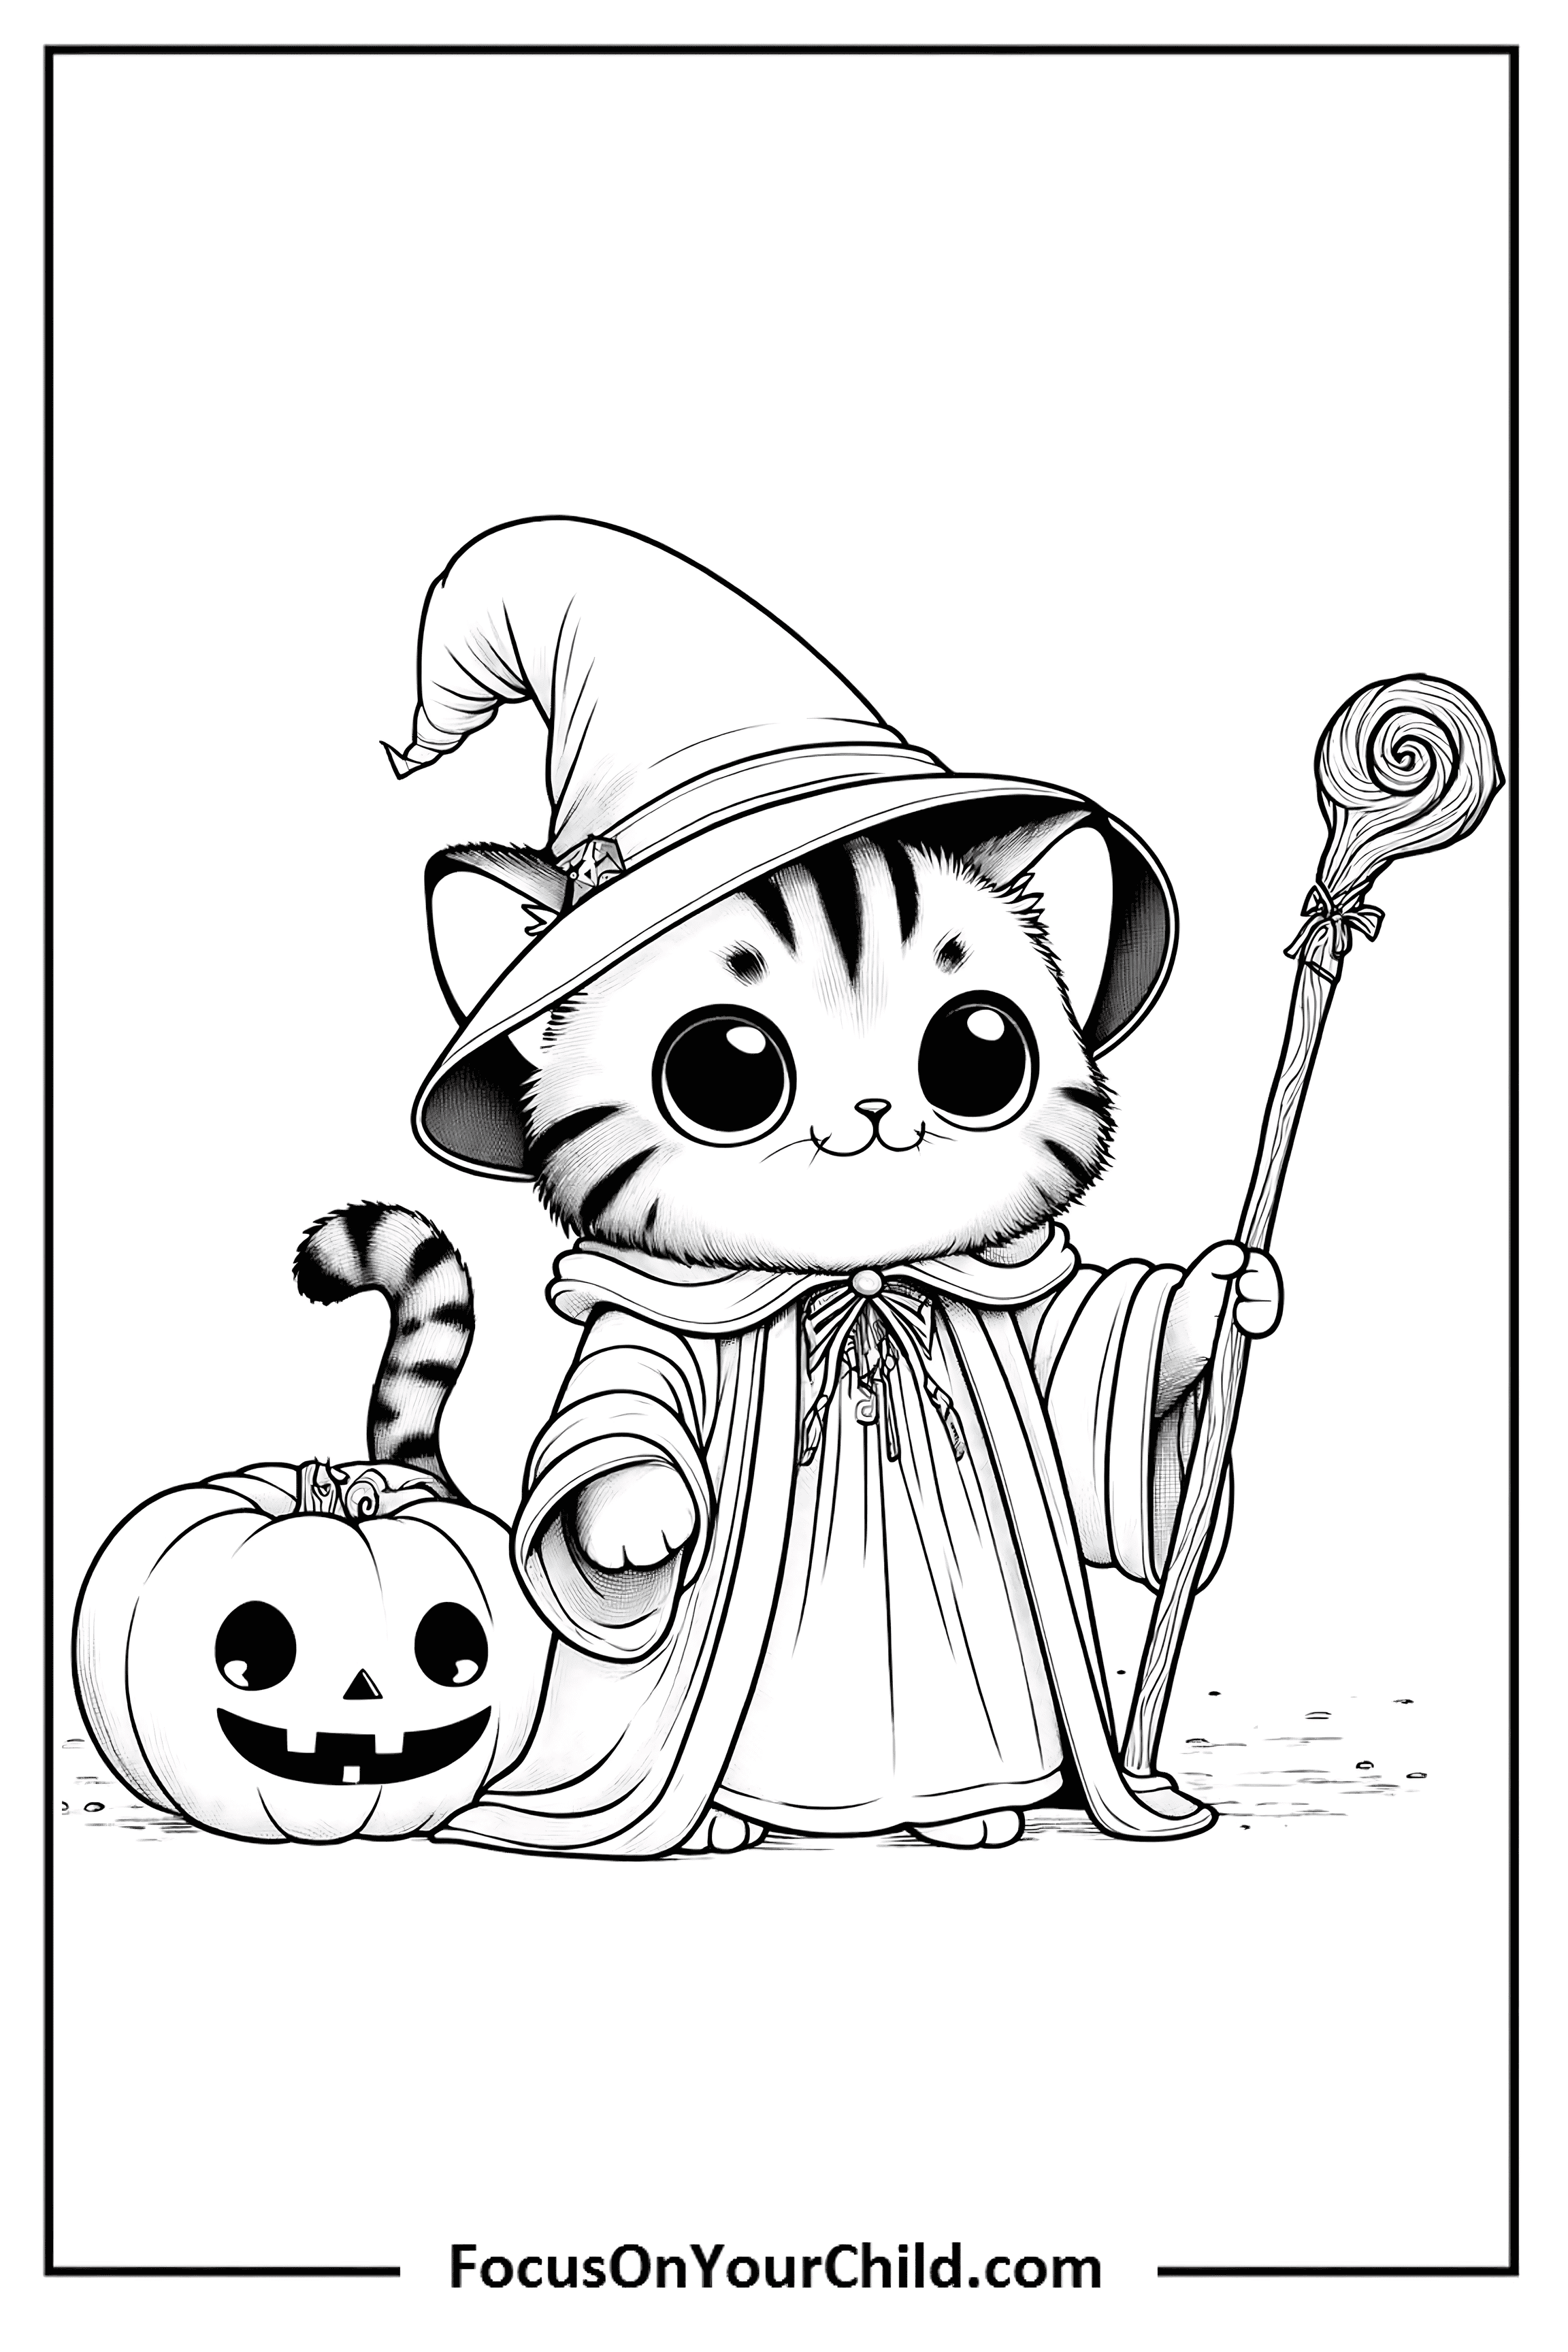 Adorable kitten dressed as a wizard with a jack-o-lantern, perfect for Halloween.